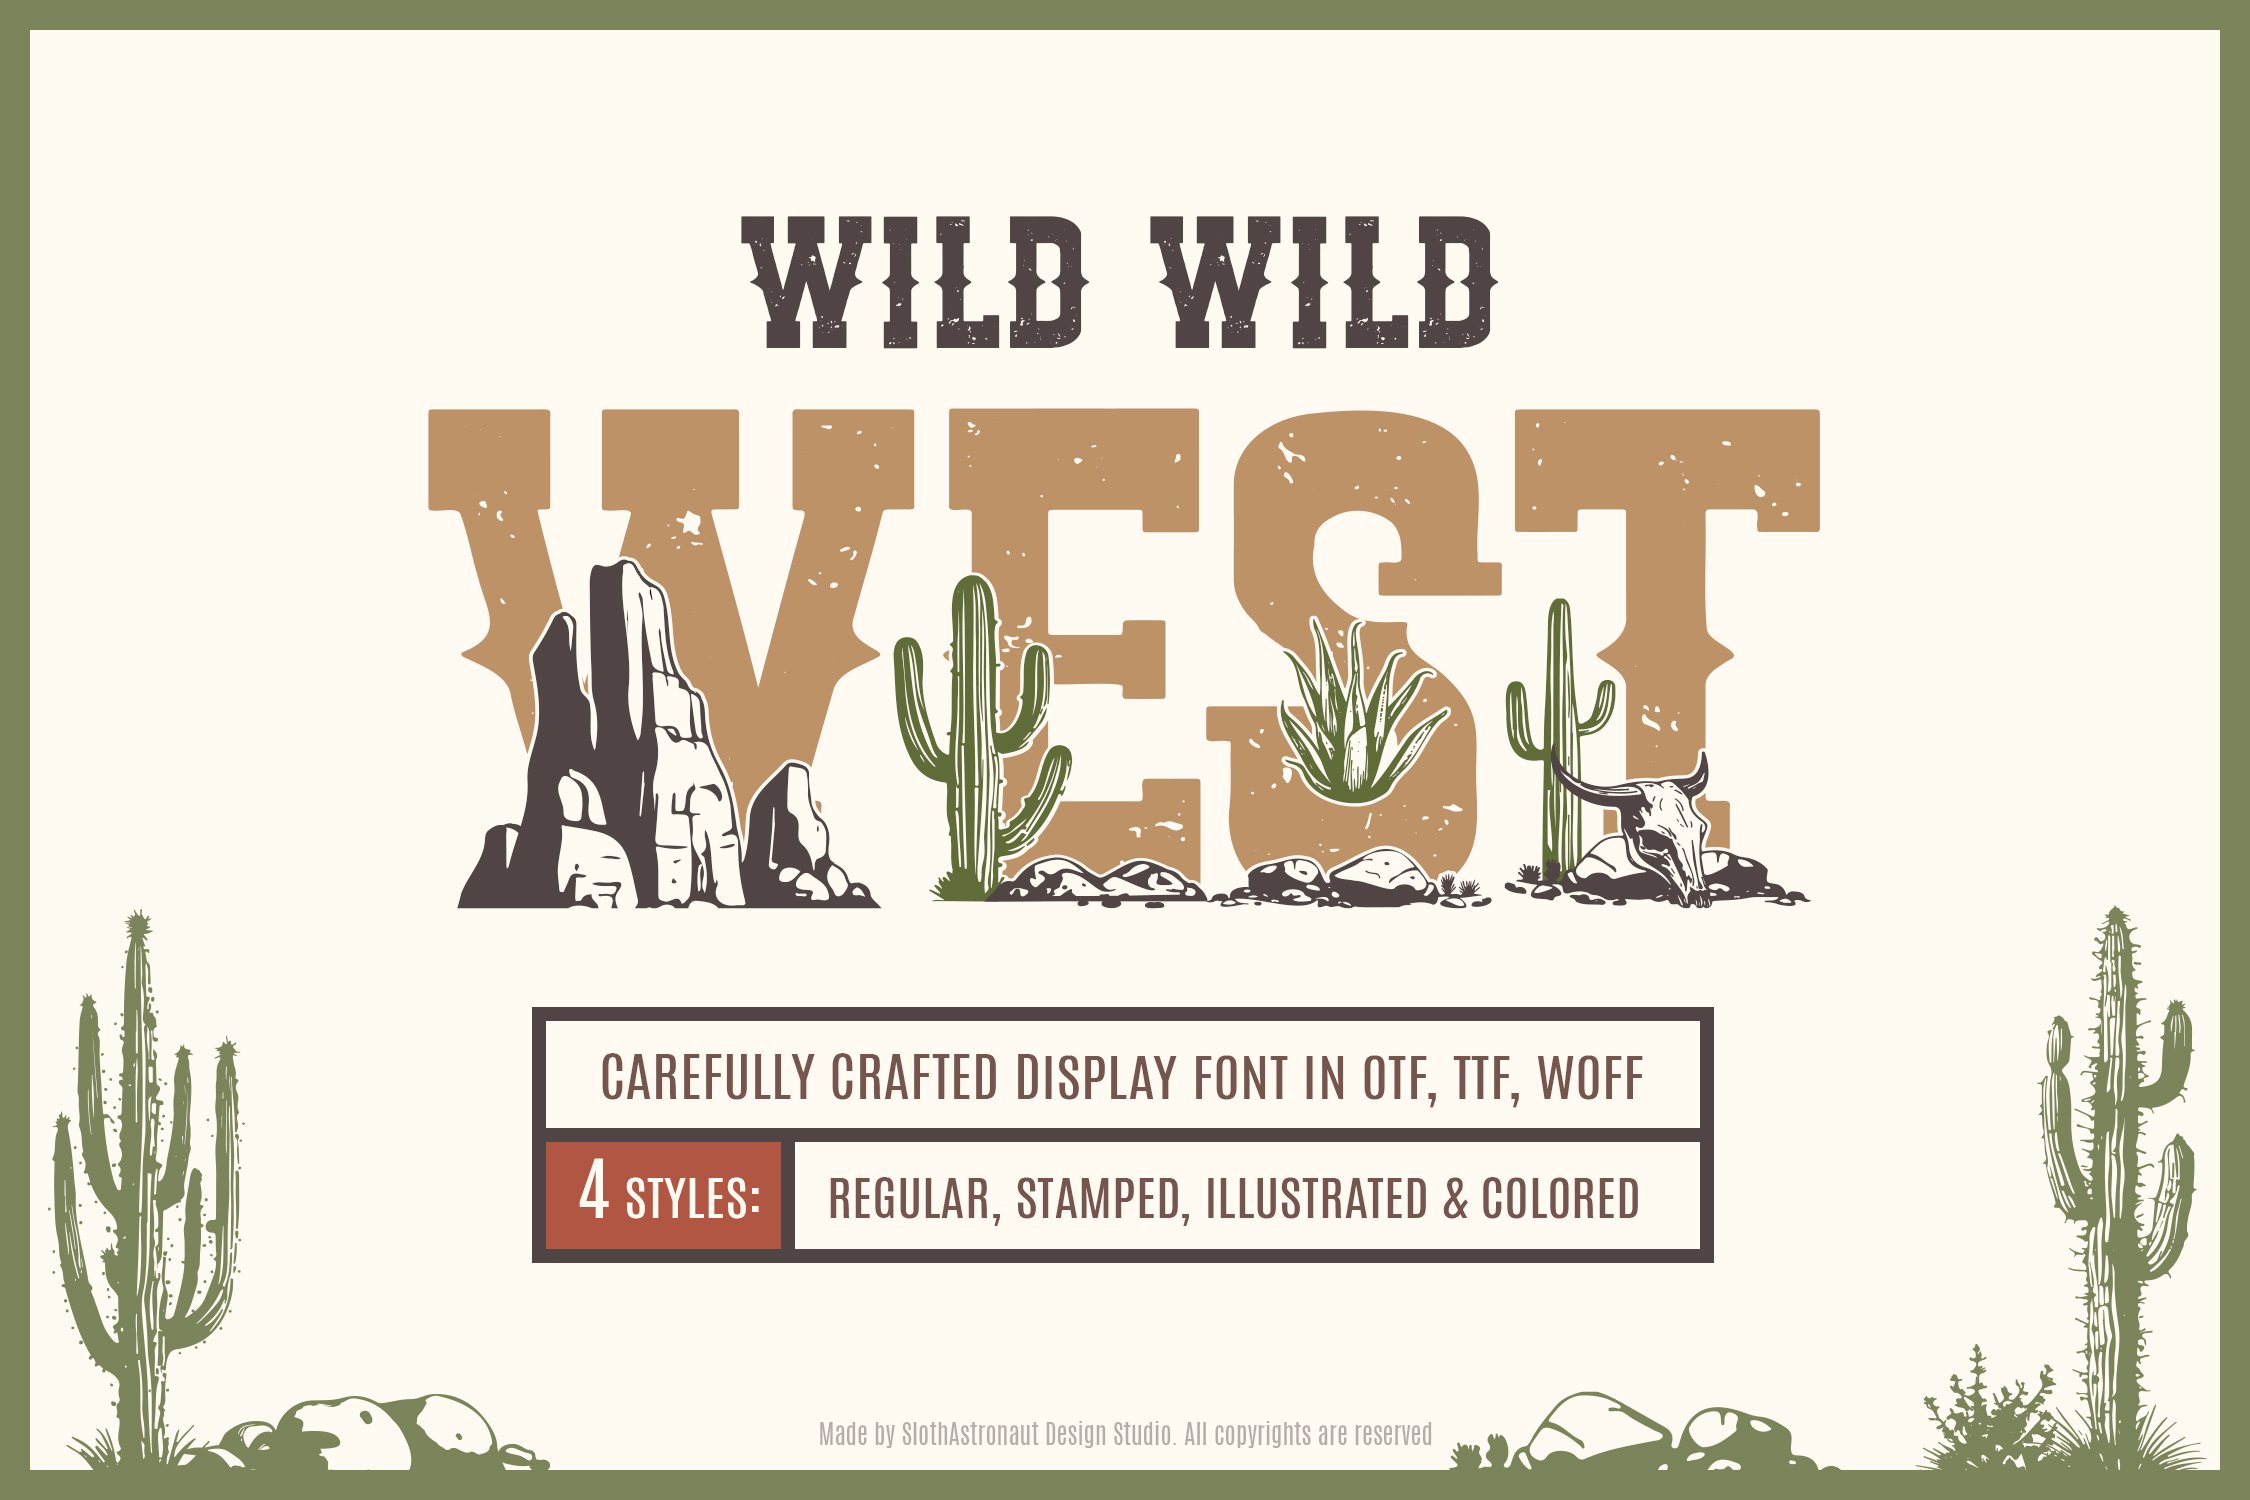 Wild Wild West. Color Font (4styles) cover image.